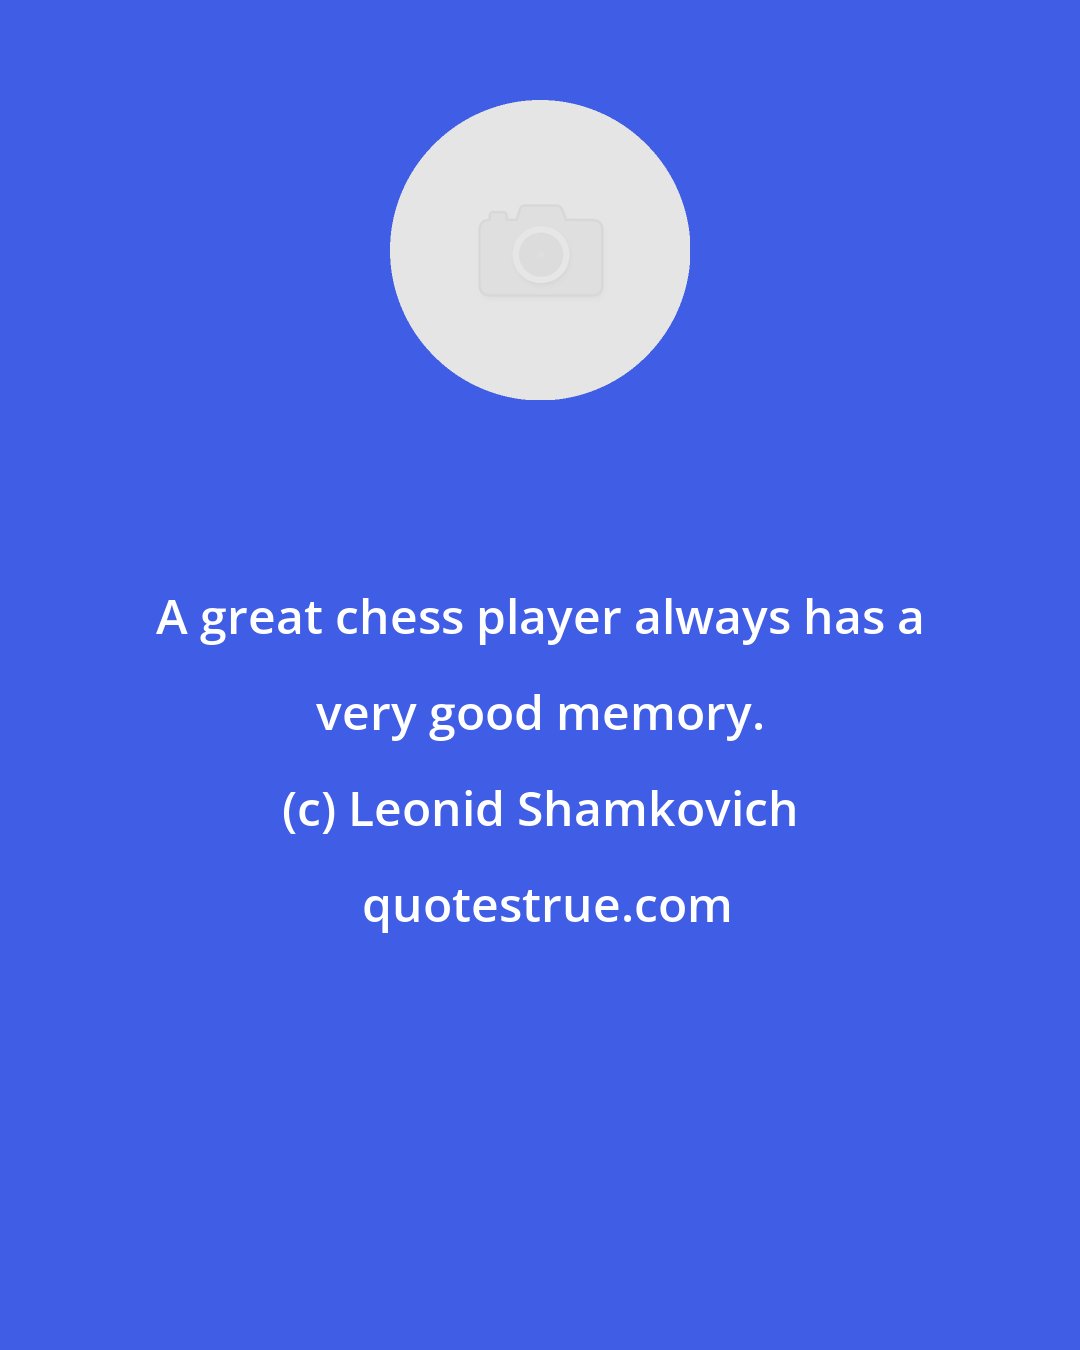 Leonid Shamkovich: A great chess player always has a very good memory.